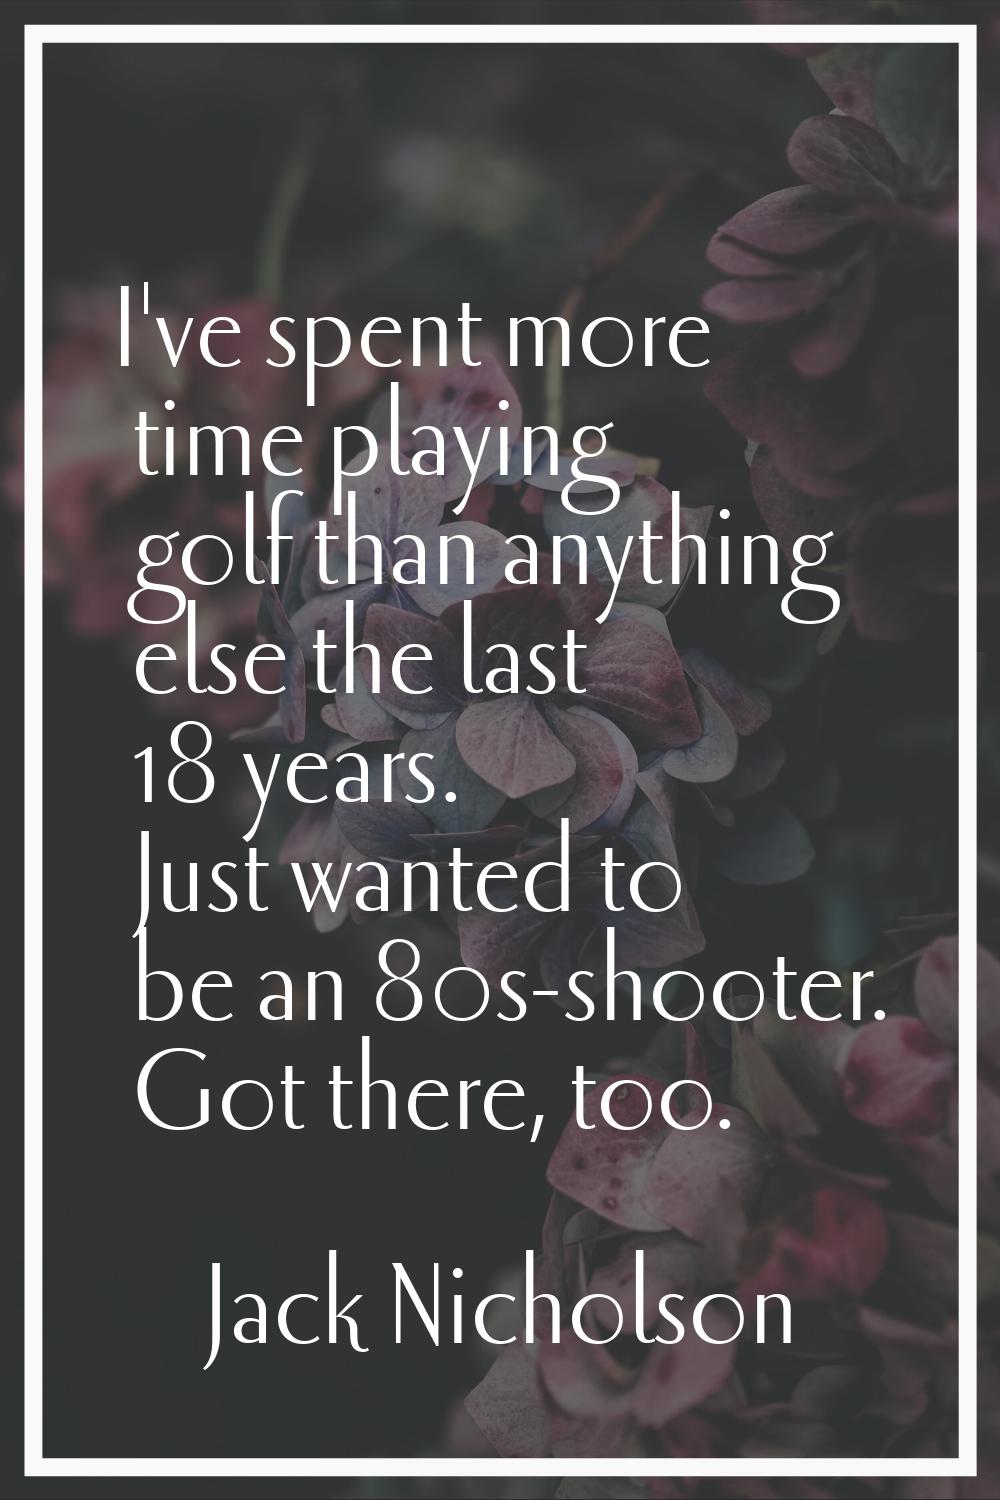 I've spent more time playing golf than anything else the last 18 years. Just wanted to be an 80s-sh